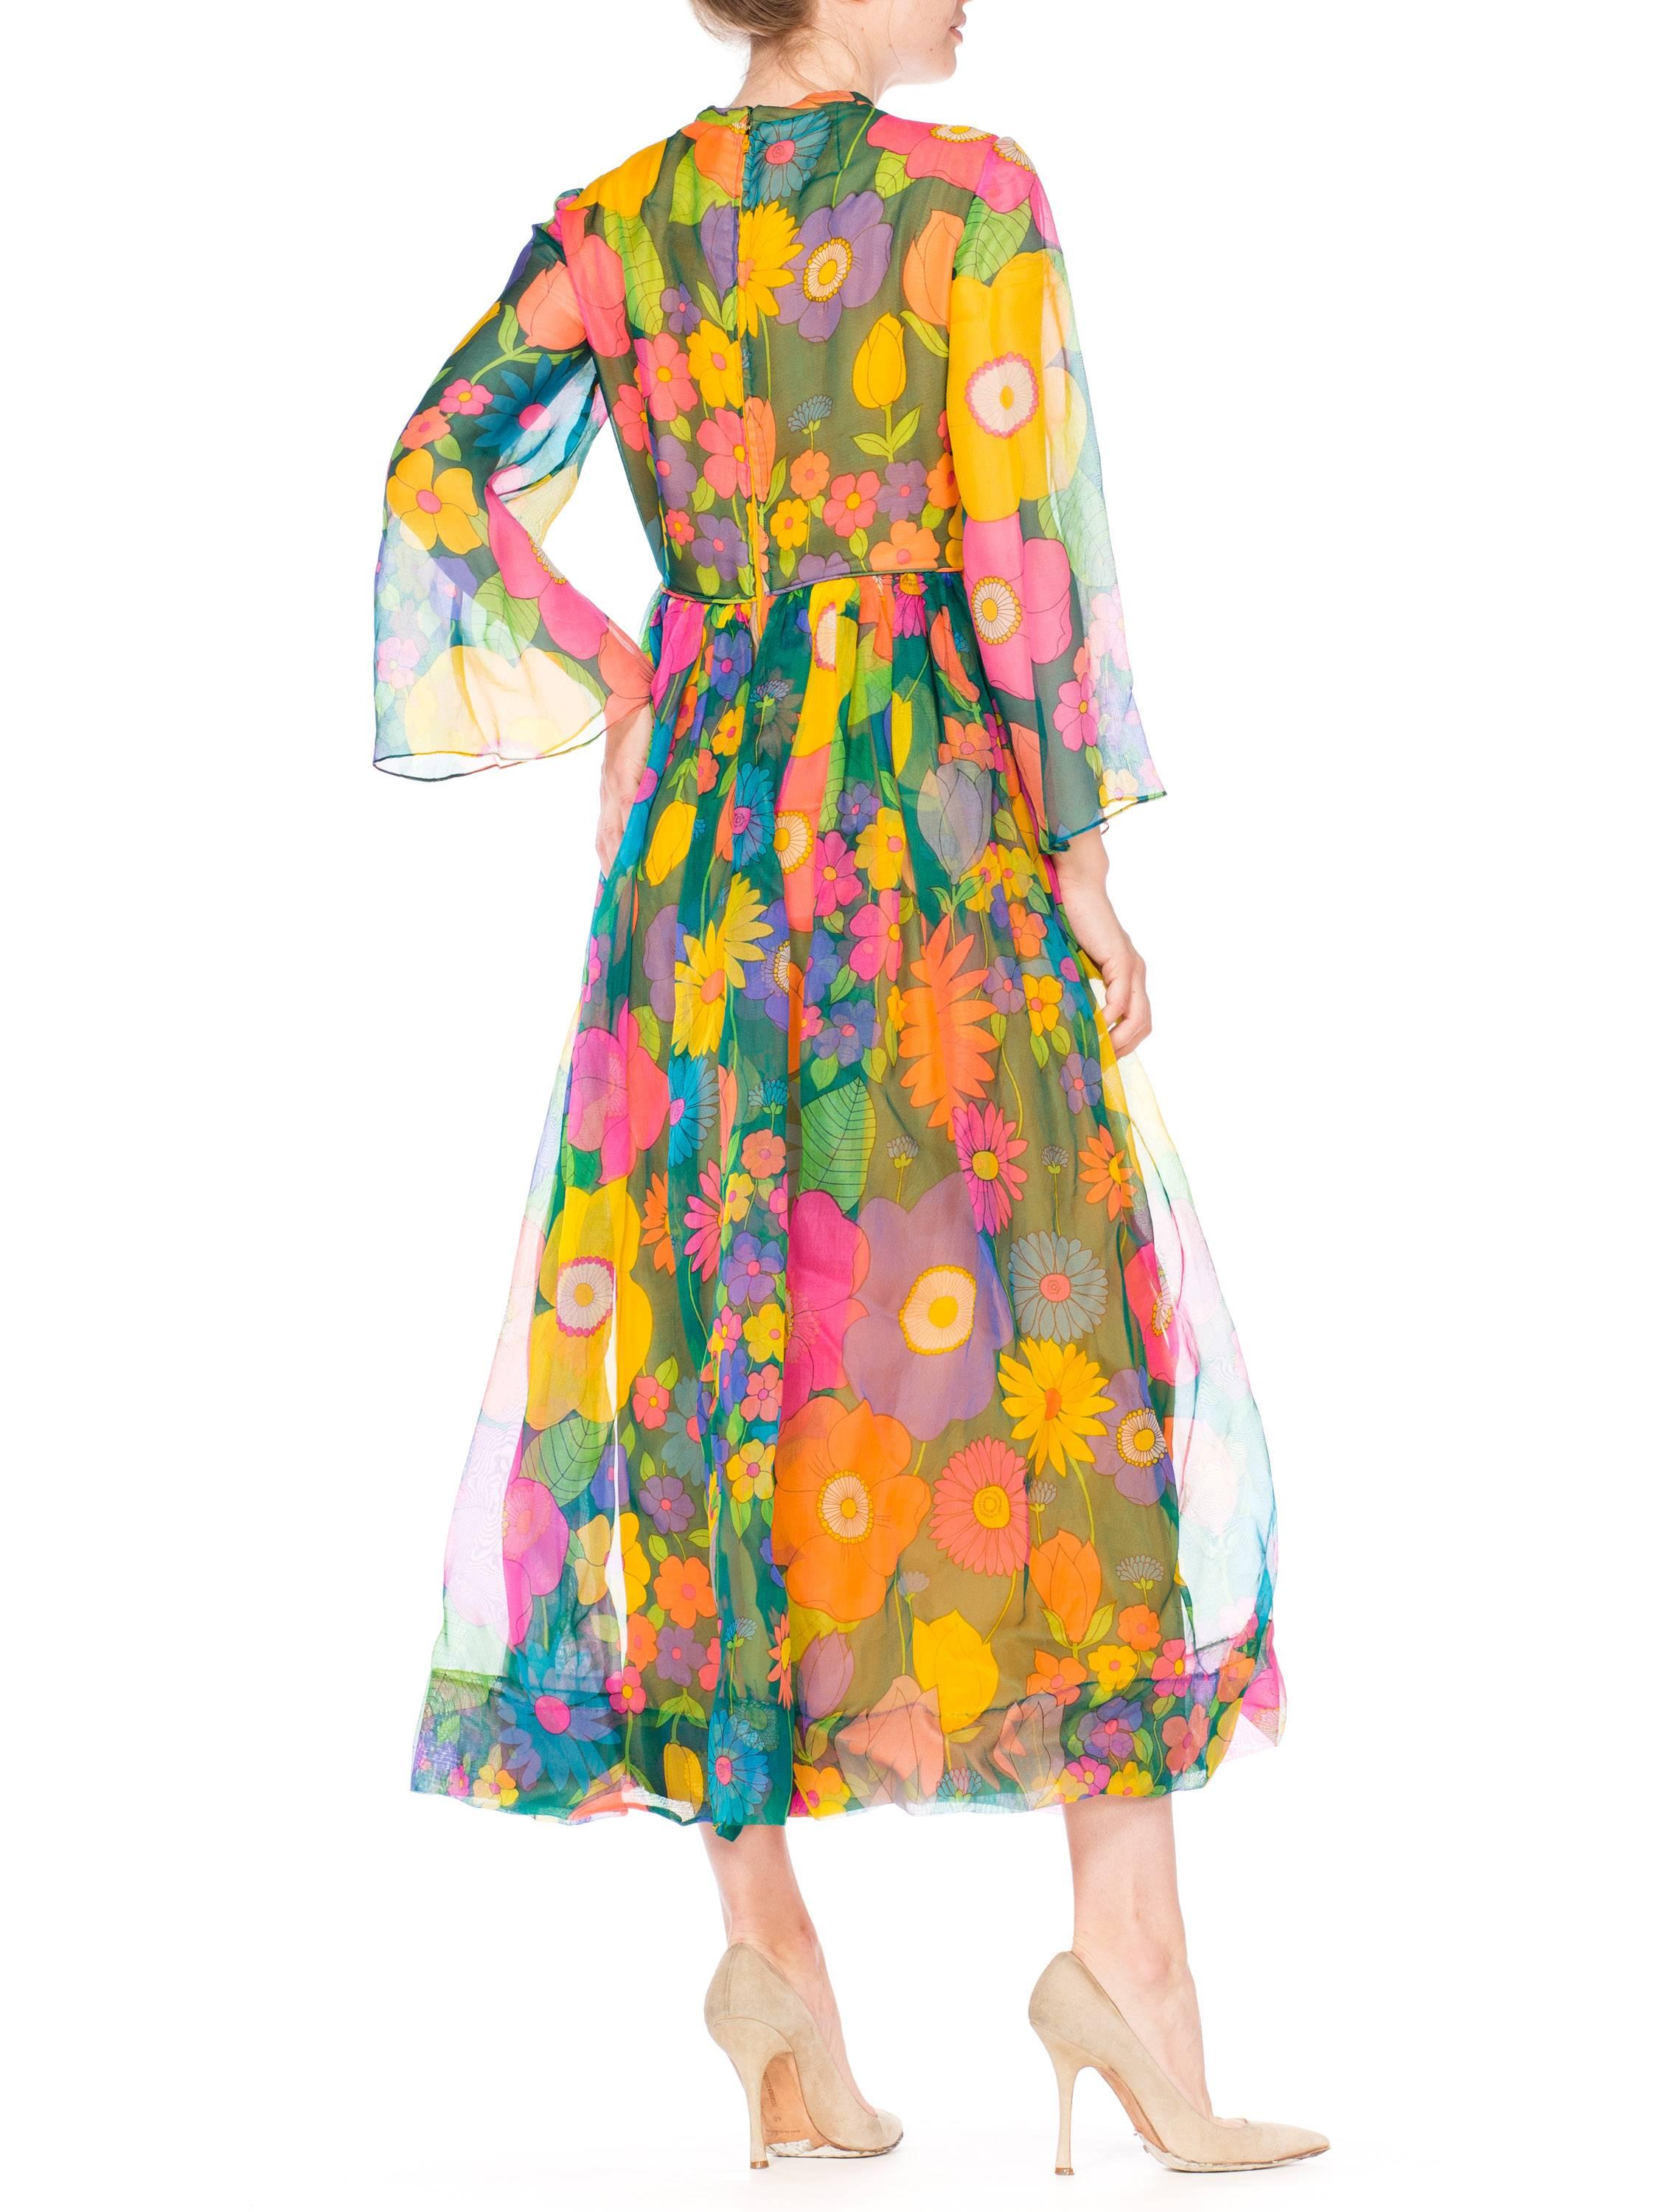 1960s 1970s Floral Print Dress with Bell Sleeves 3